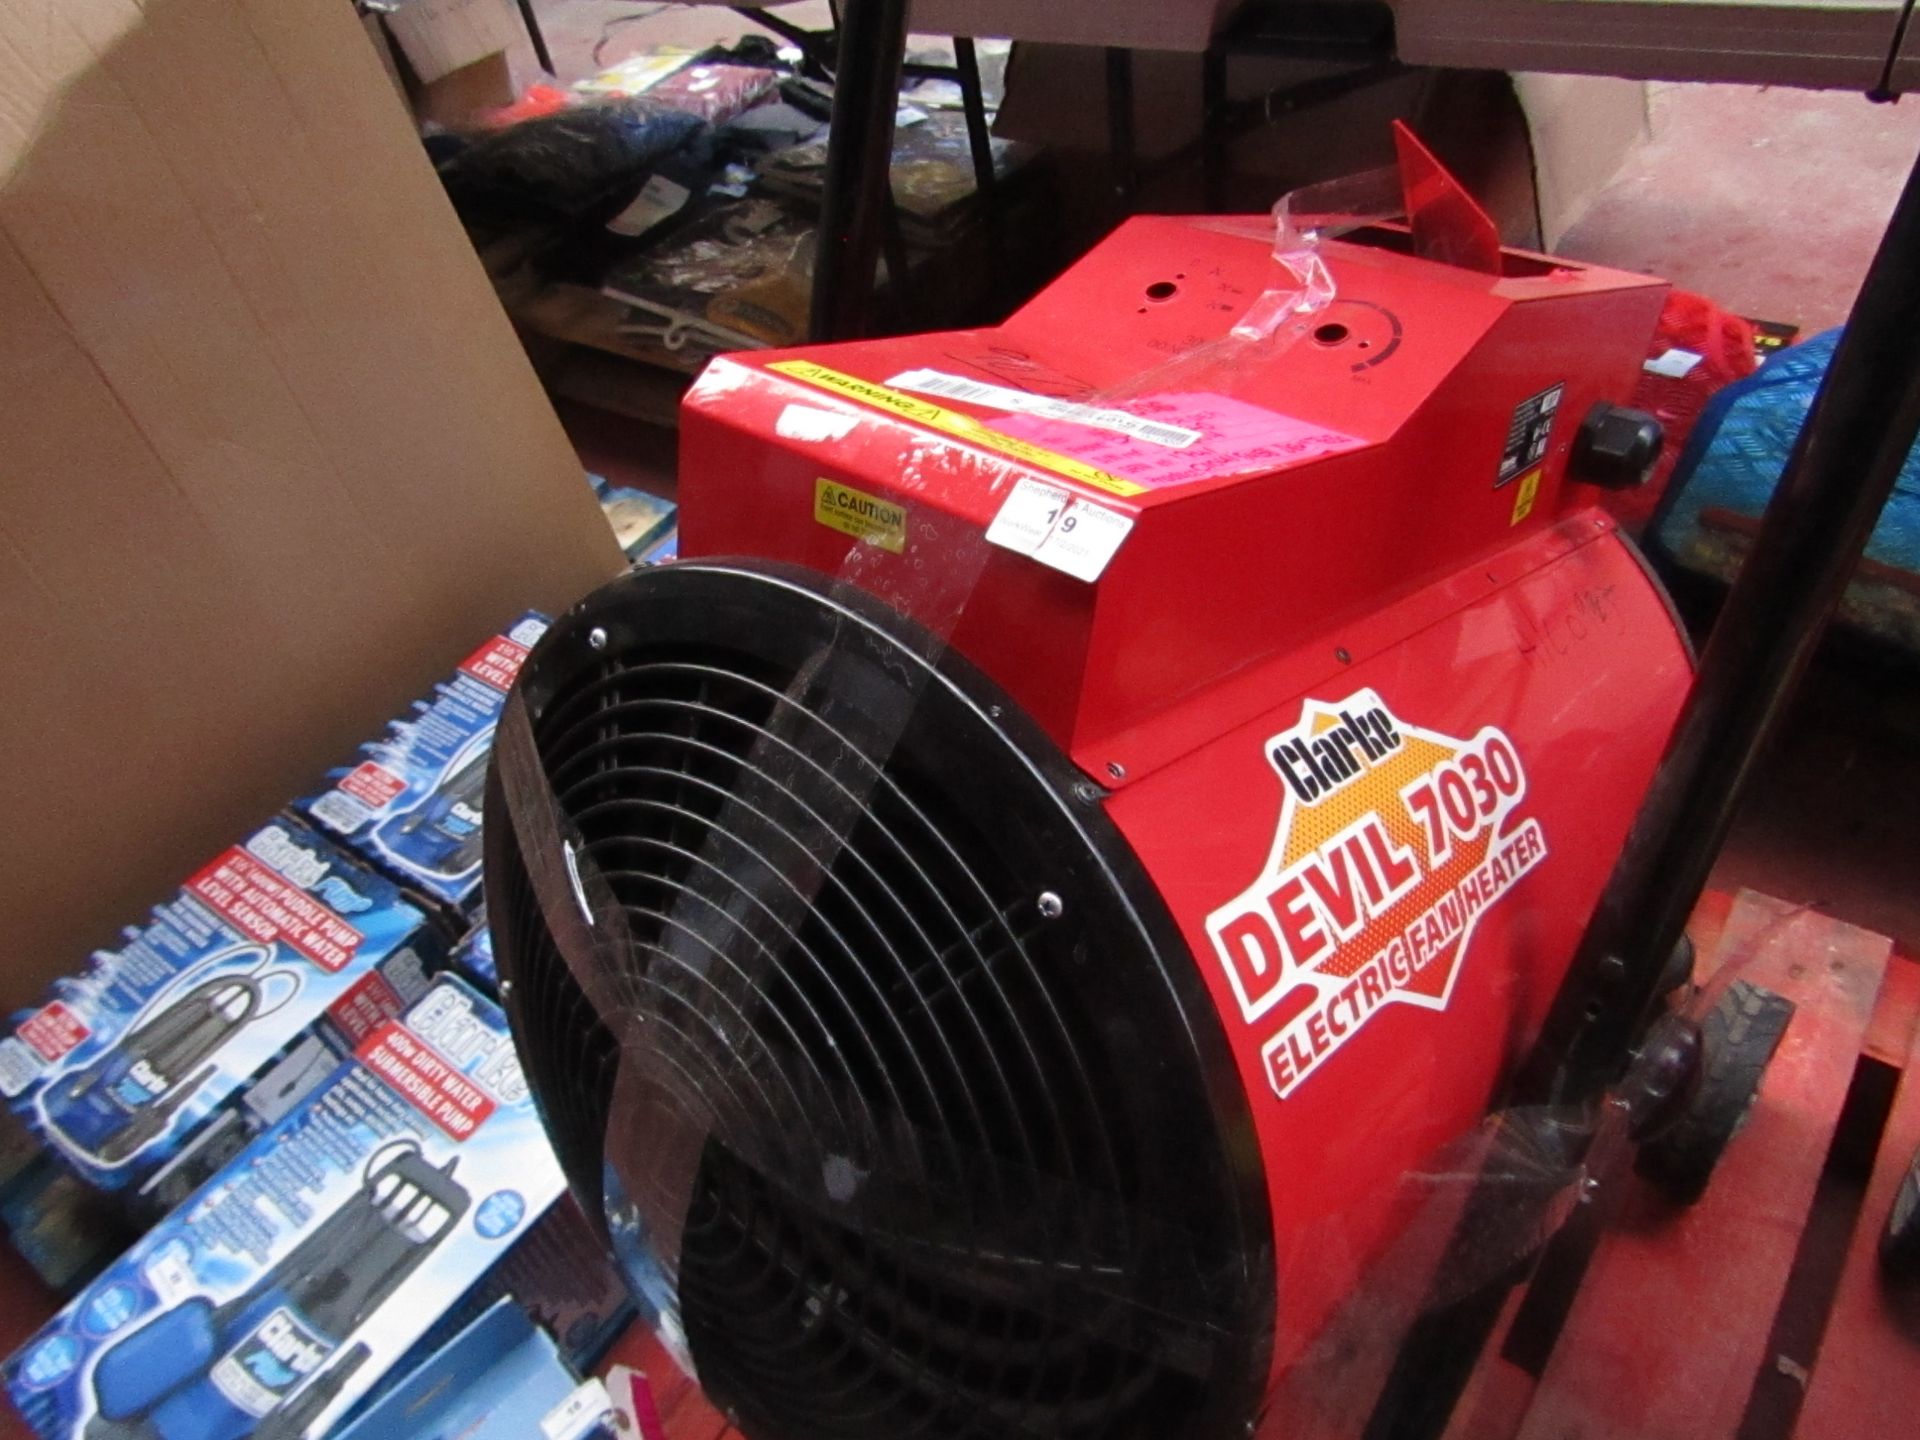 1x Clarke Devil 7030 Electric Fan Heater, This lot is a Machine Mart product which is raw and